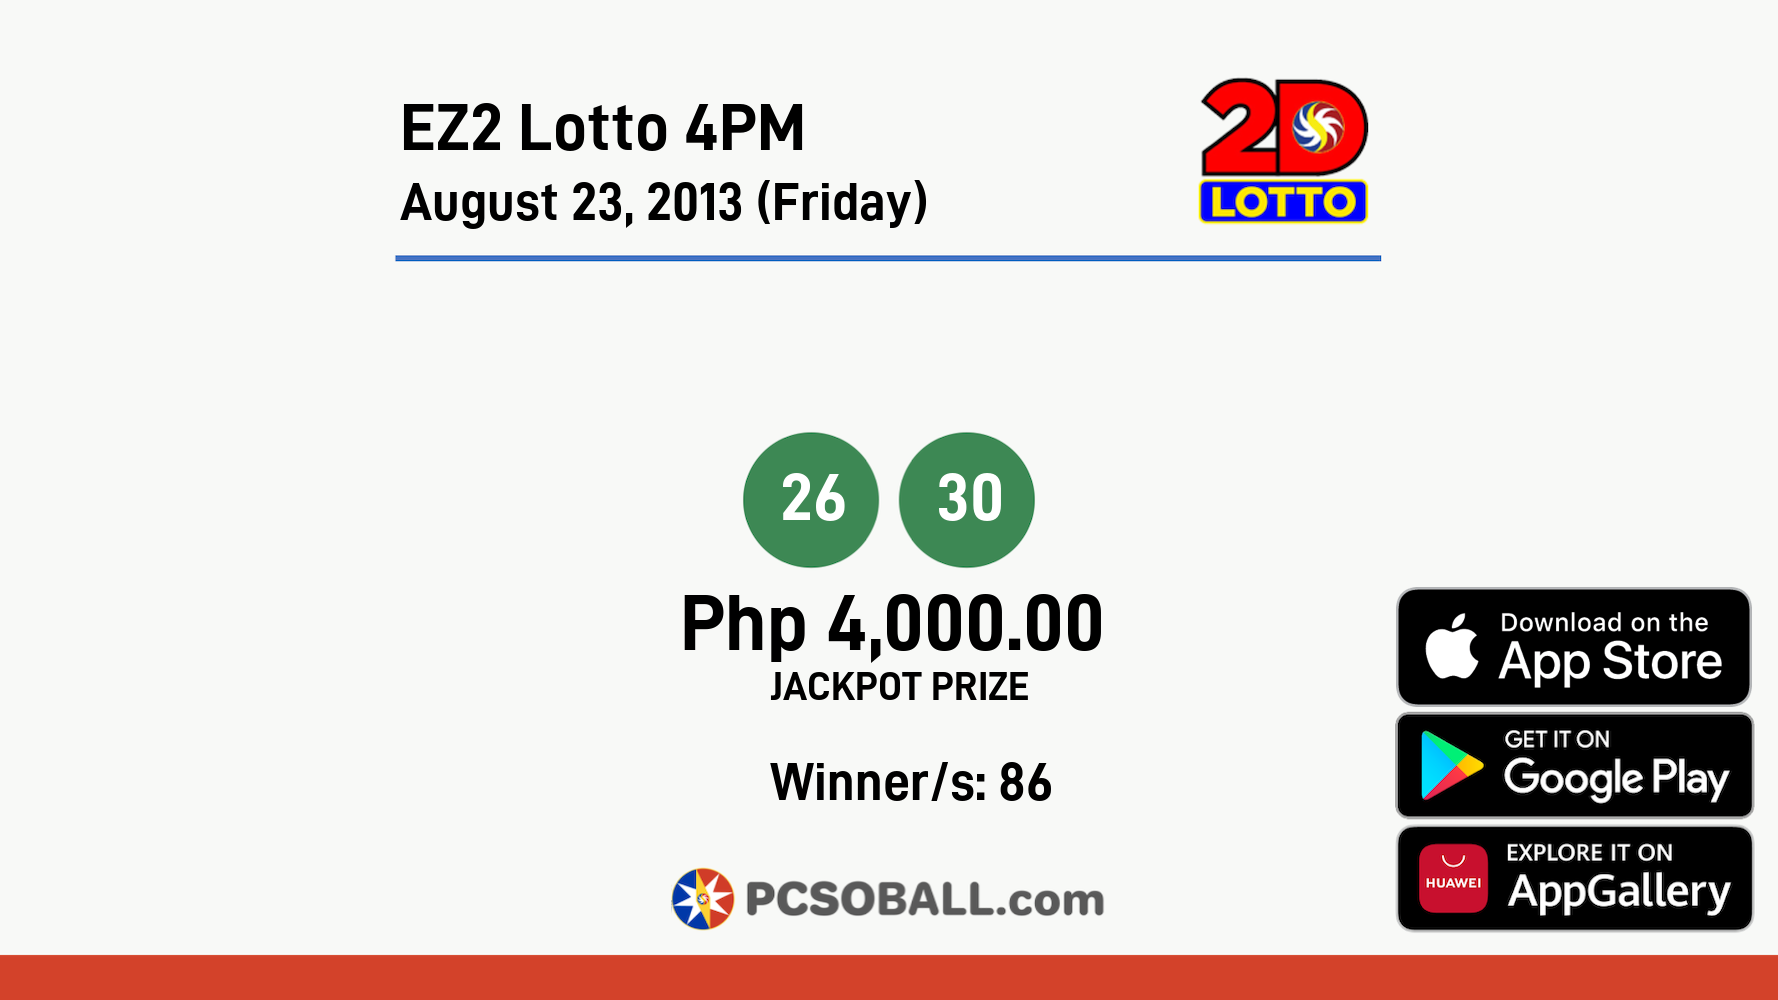 EZ2 Lotto 4PM August 23, 2013 (Friday) Result